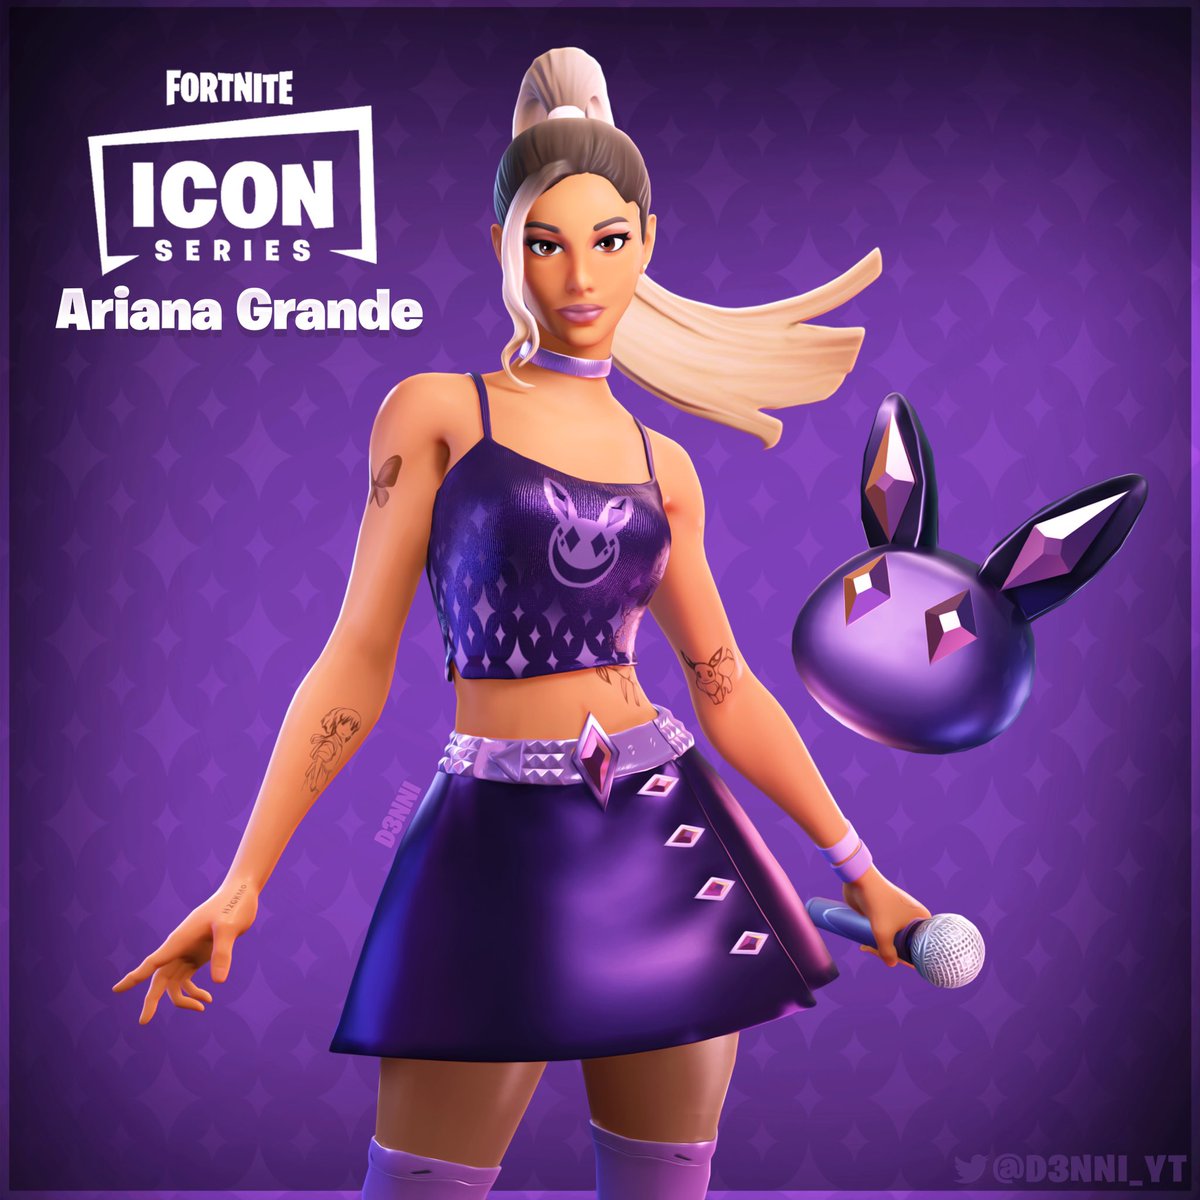 D3NNI - ✨ARIANA GRANDE ICON SERIES SKIN CONCEPT✨ This concept has been in the works for a while now and it's finally complete! Tried to make this a mix